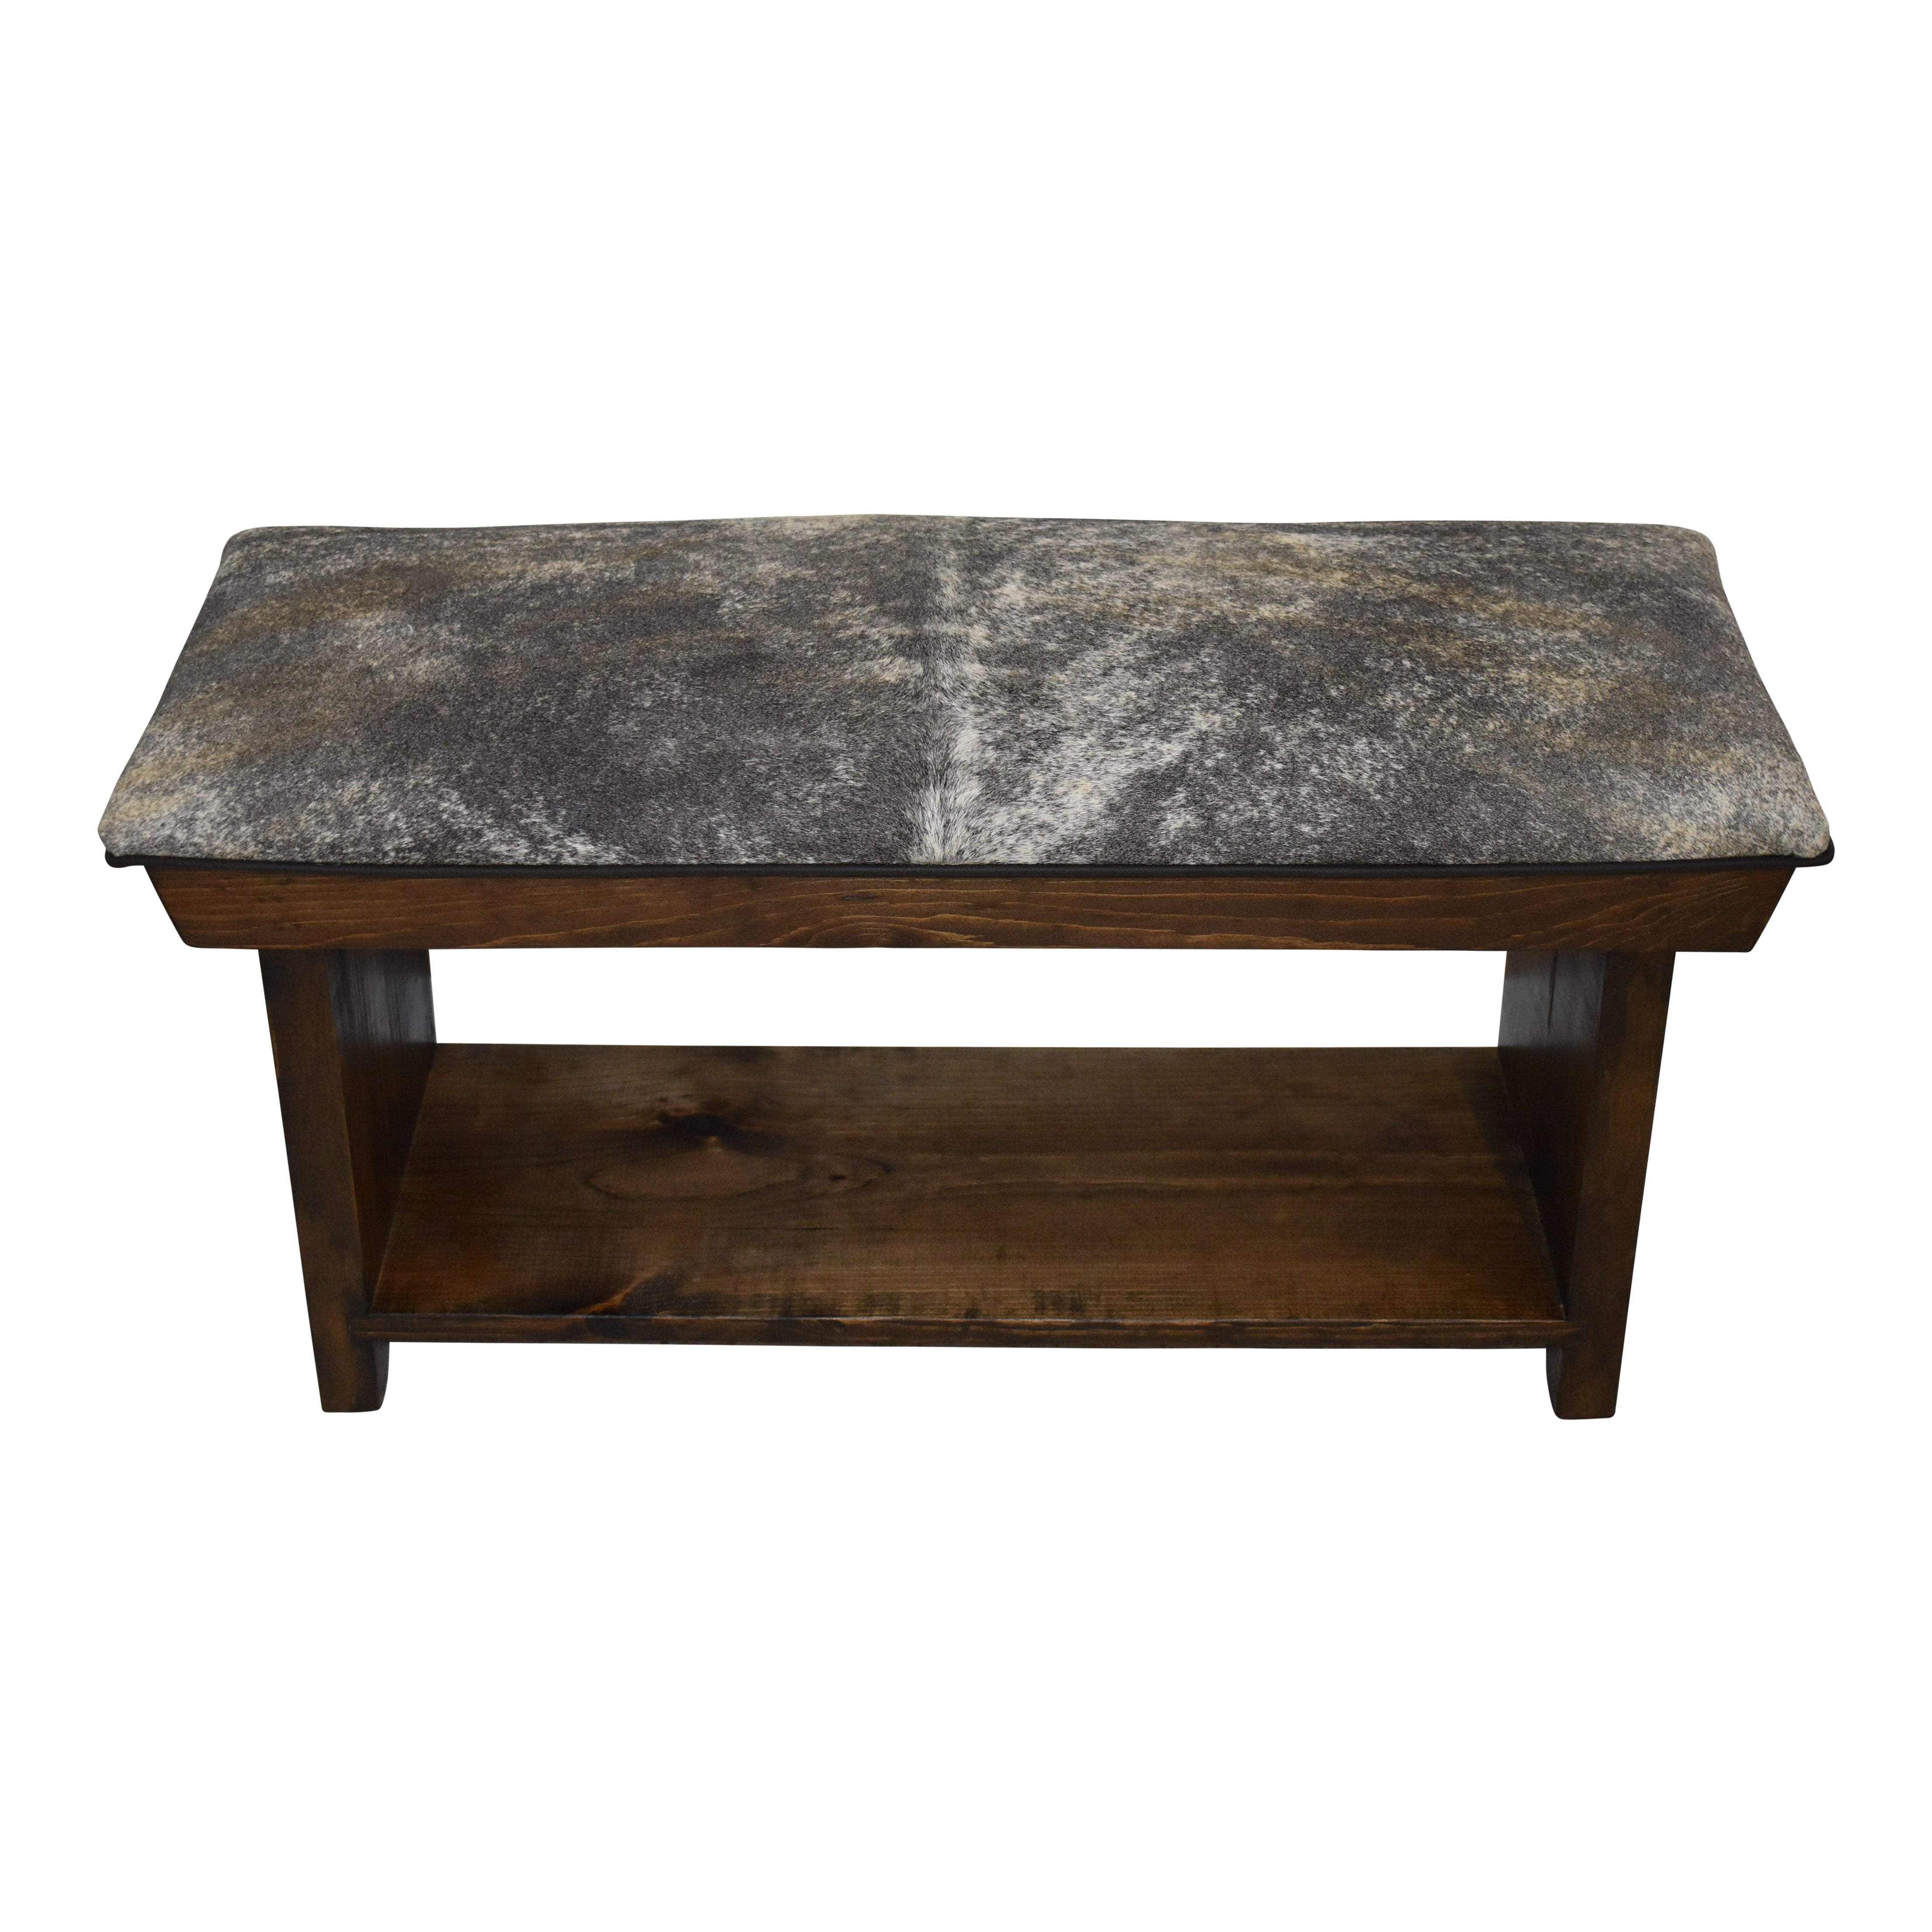 Cowhide Bench with Lower Shelf